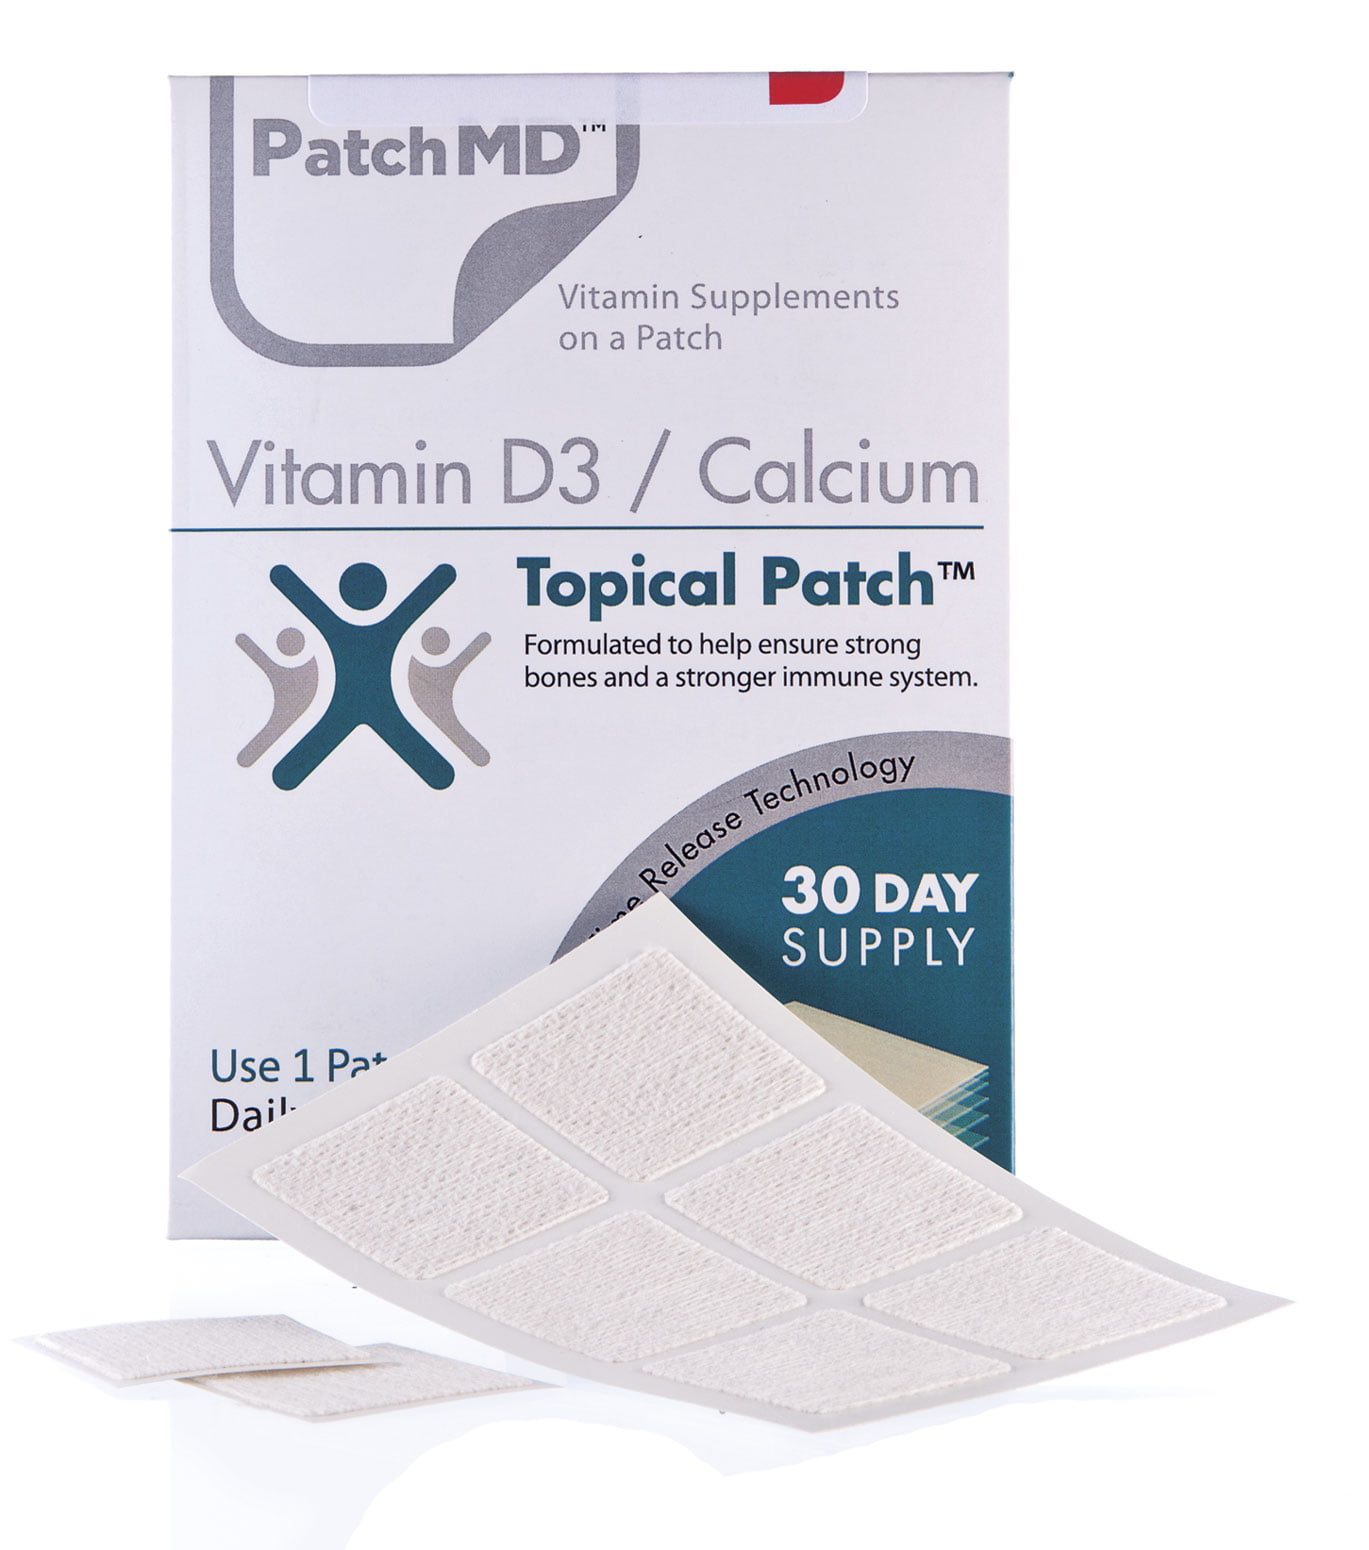 The Patch Brand: Immunity Vitamin Patch, 15 ea